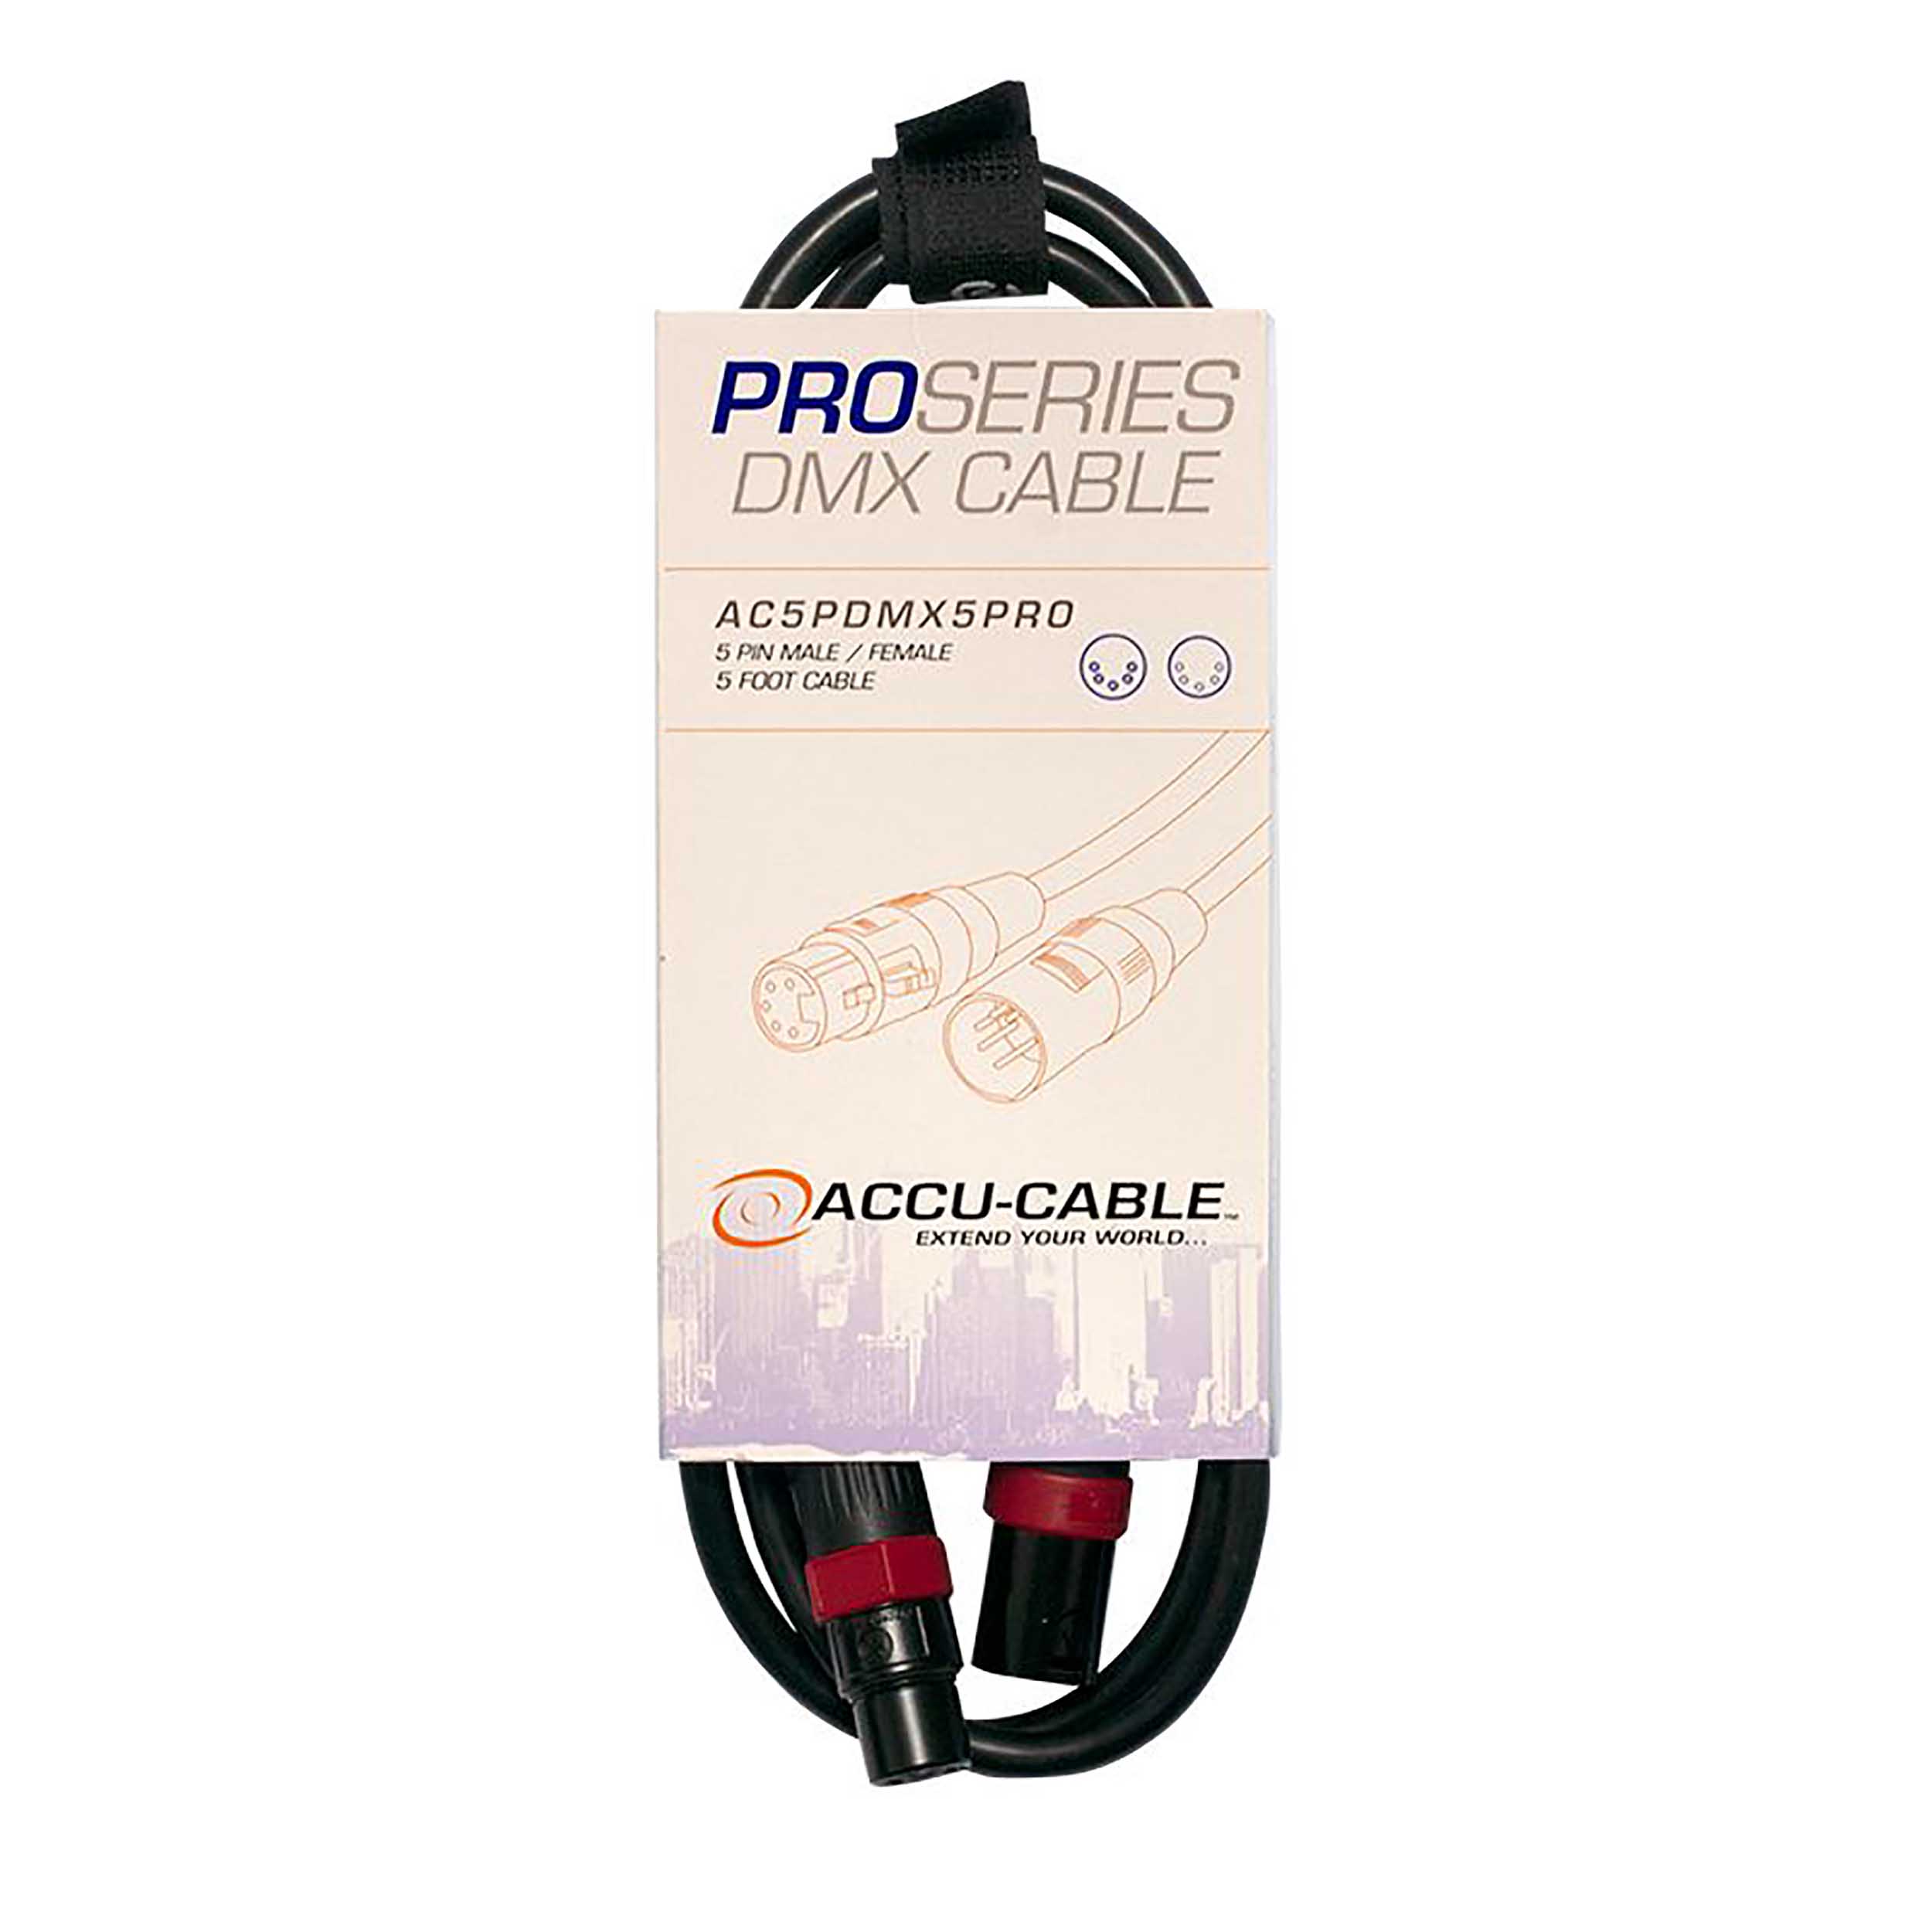 Accu-Cable AC5PDMX5PRO, Pro Series 5-Pin Male to 5-Pin Female Connection DMX Cable - 5 Ft by Accu Cable